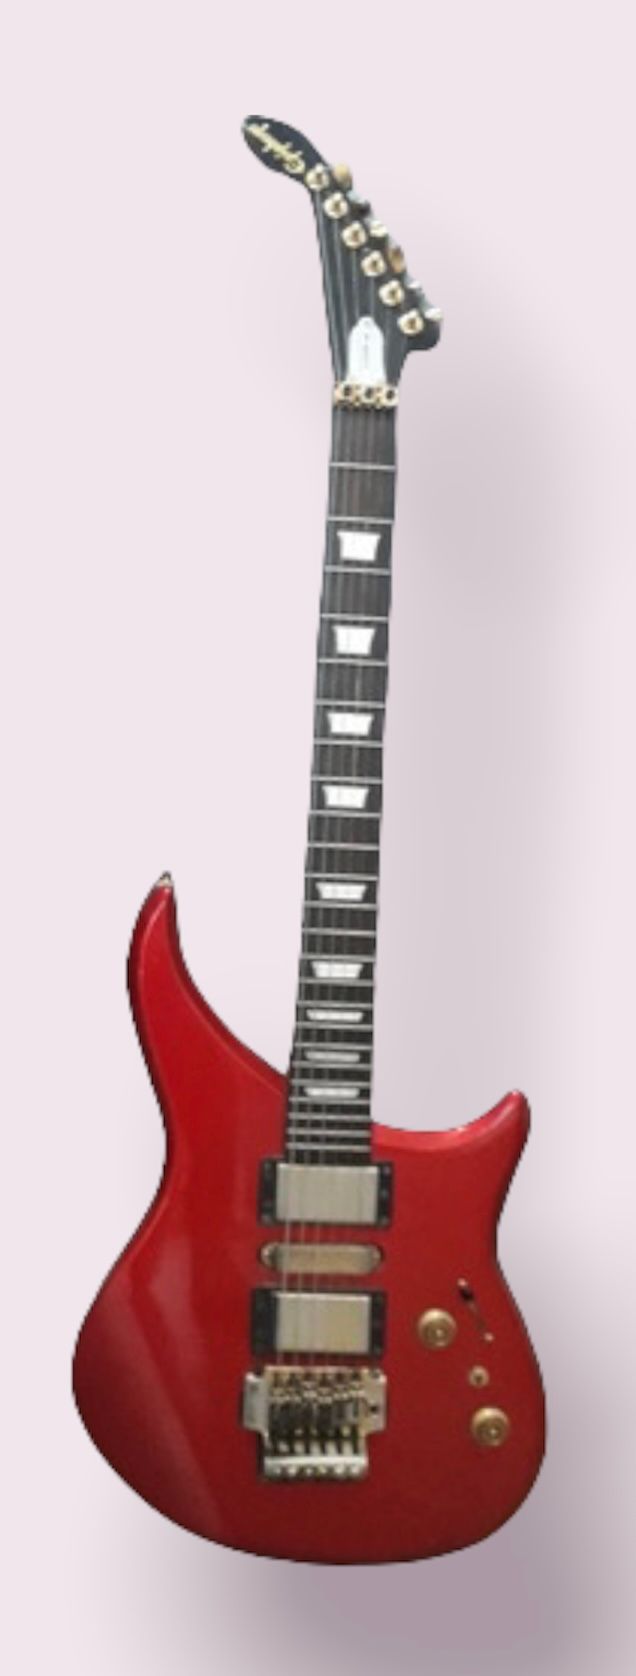 Null * GUITARE ELECTRIQUE, EPIPHONE, type Stratocaster

Rouge, n° S2030011

Avec&hellip;